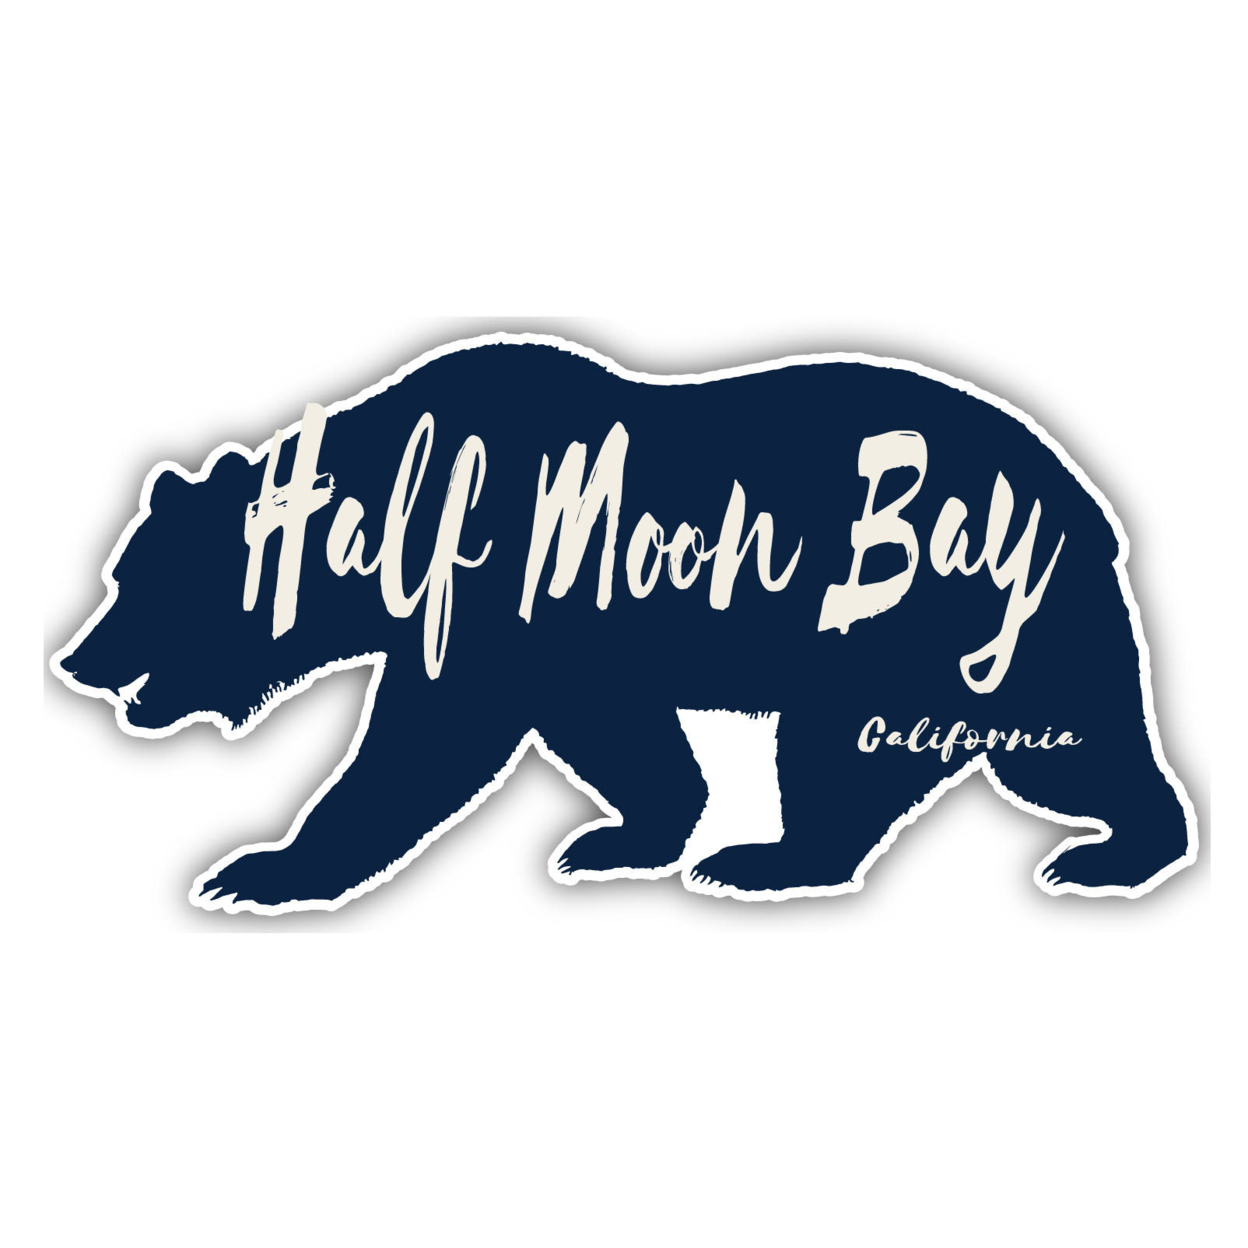 Half Moon Bay California Souvenir Decorative Stickers (Choose Theme And Size) - 4-Pack, 6-Inch, Tent